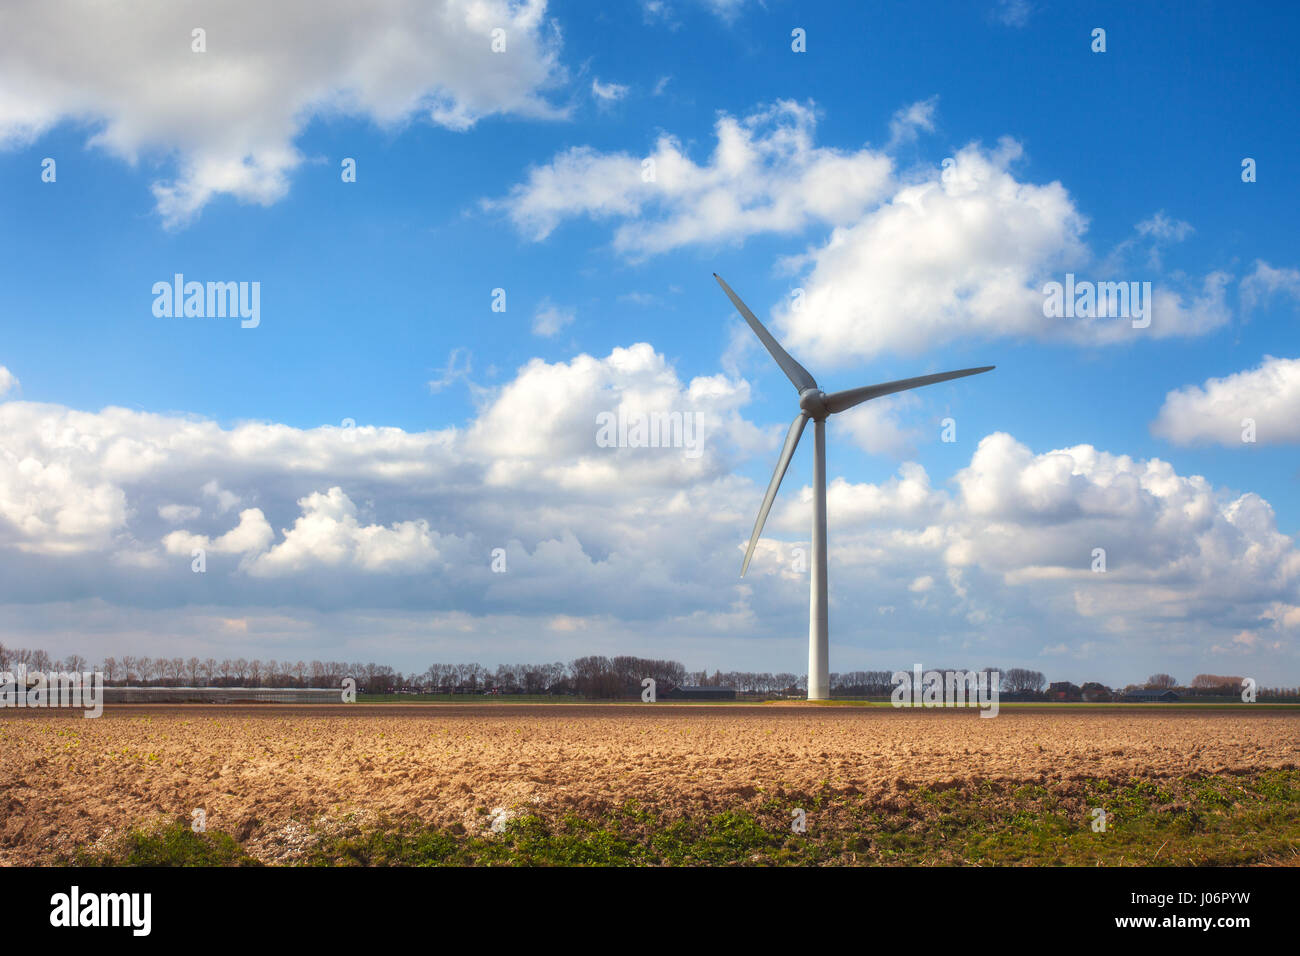 Wind turbines generating electricity. Windmills for electric power production. Landscape with wind mills generating energy on the field and colorful b Stock Photo